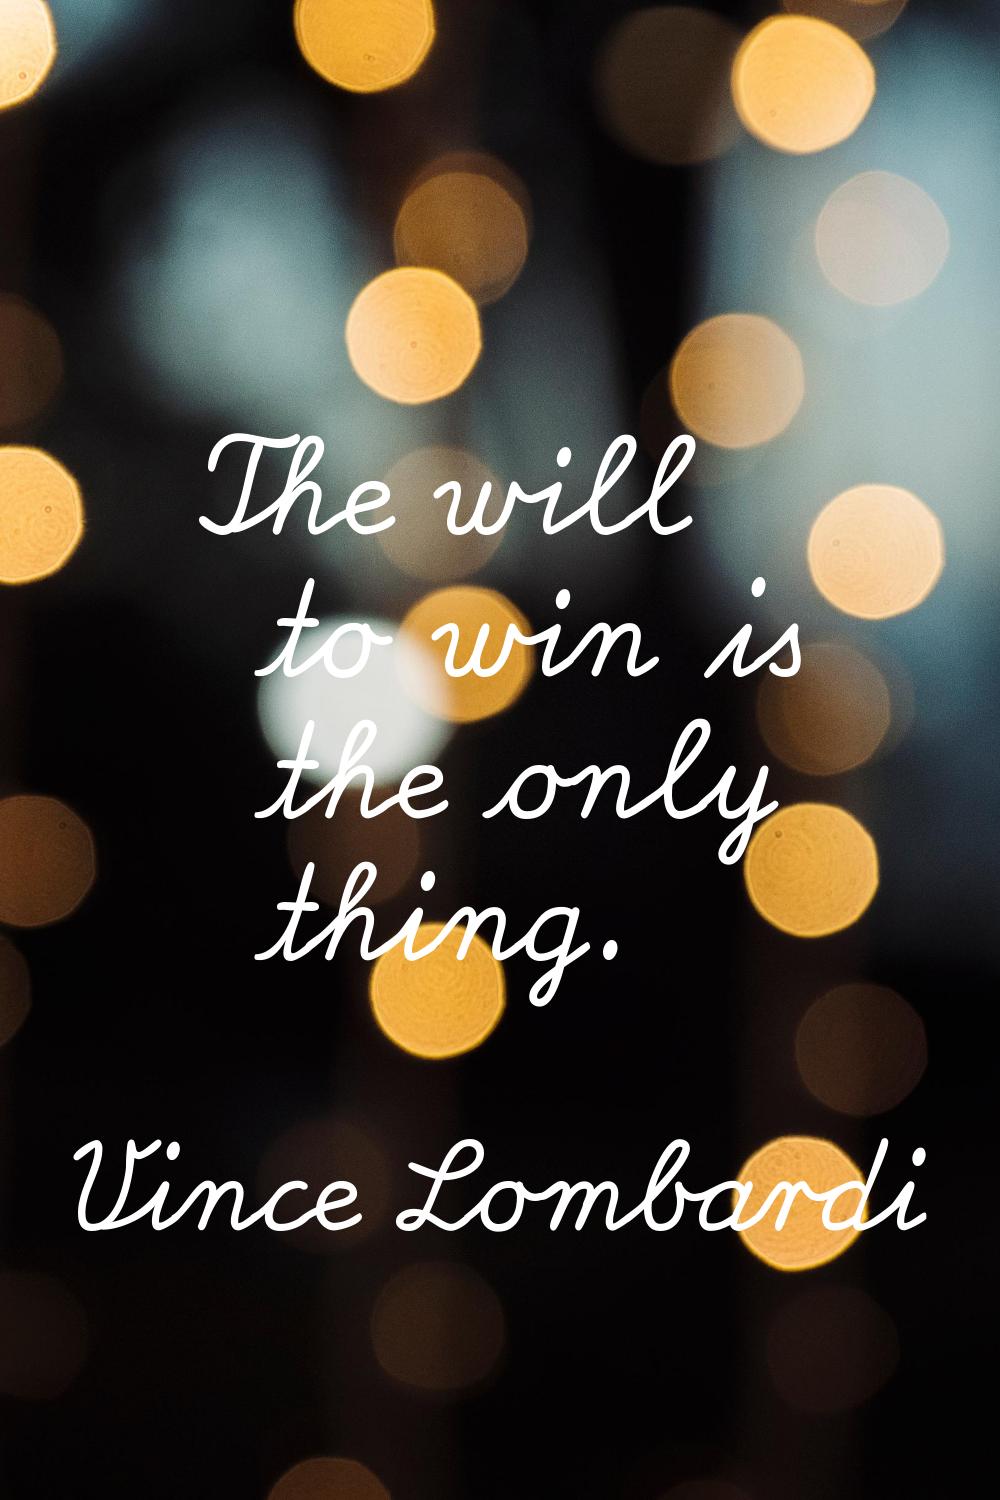 The will to win is the only thing.